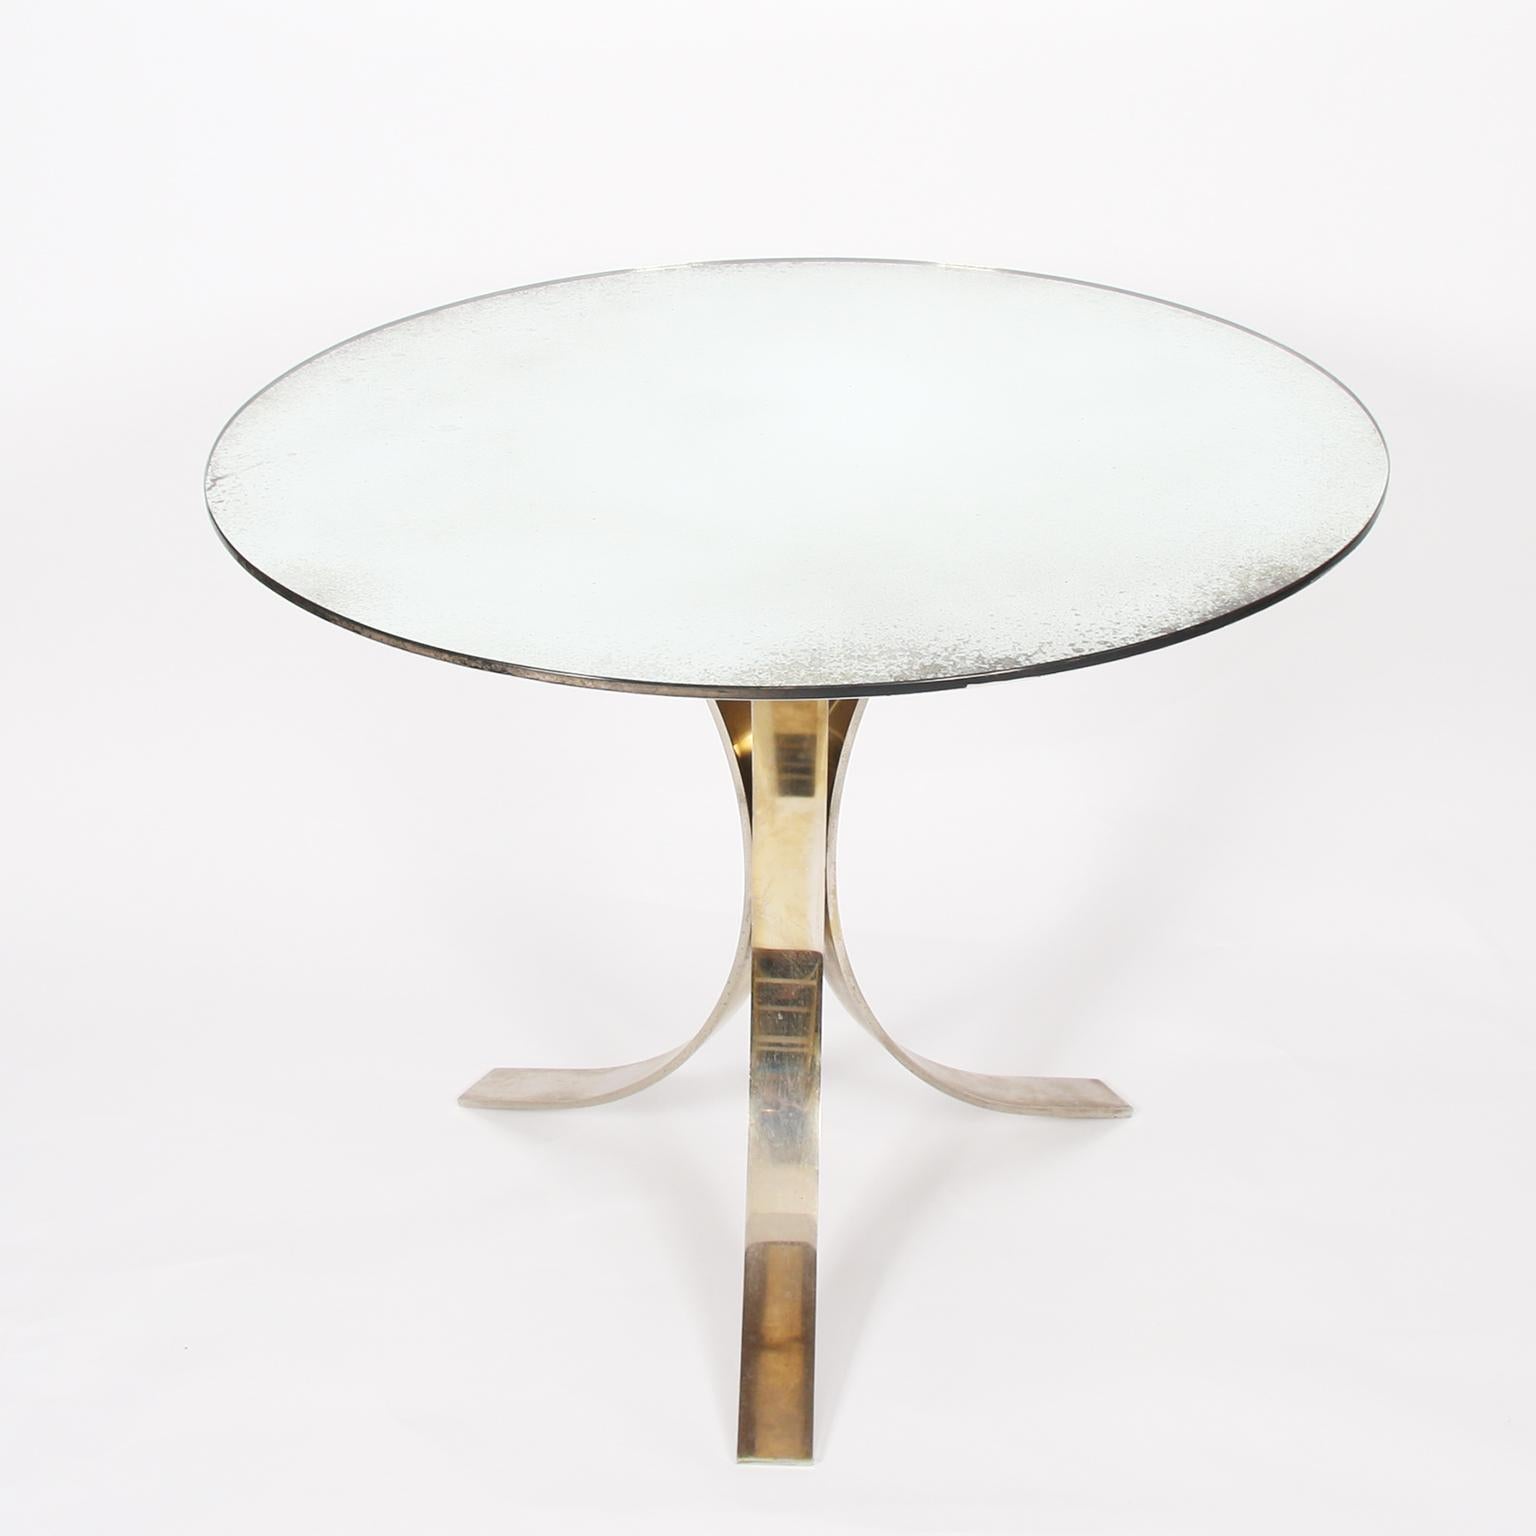 French, 1970s

A beautiful, mirrored glass, centre table on three mirrored legs. 

Lovely patina to the glass.